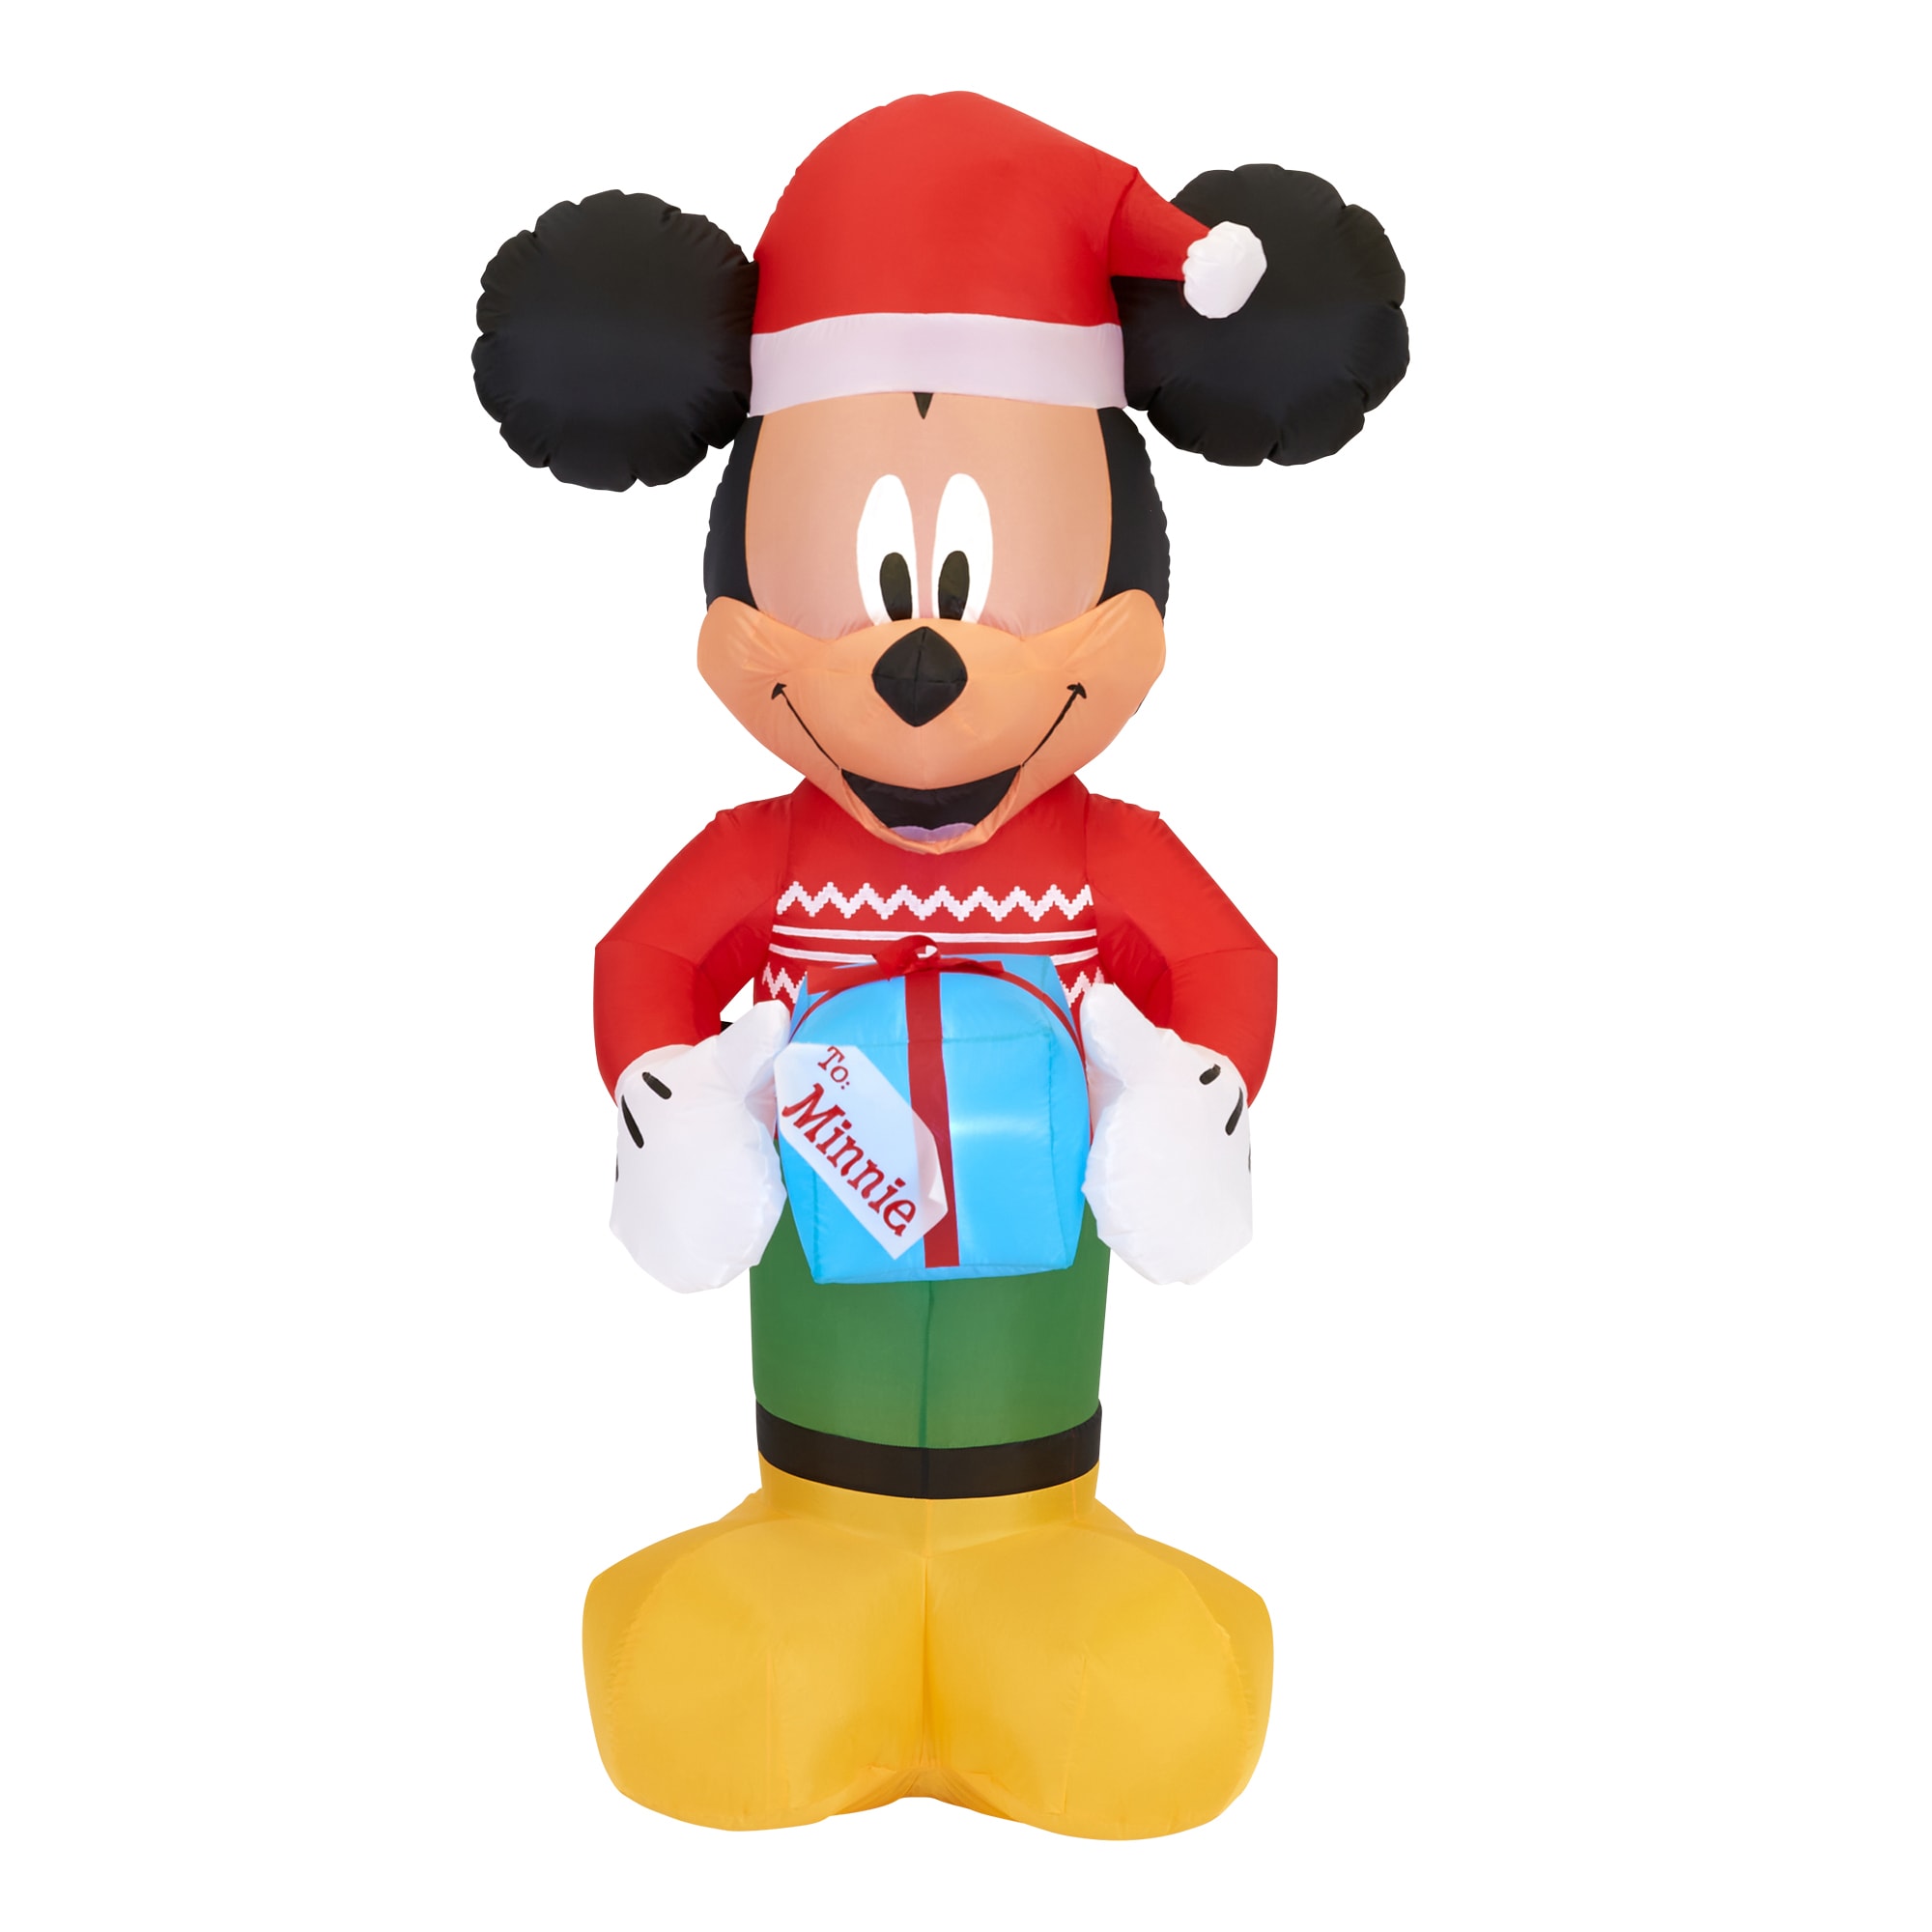 Disney 6.99-ft Lighted Mickey Mouse Christmas Inflatable at